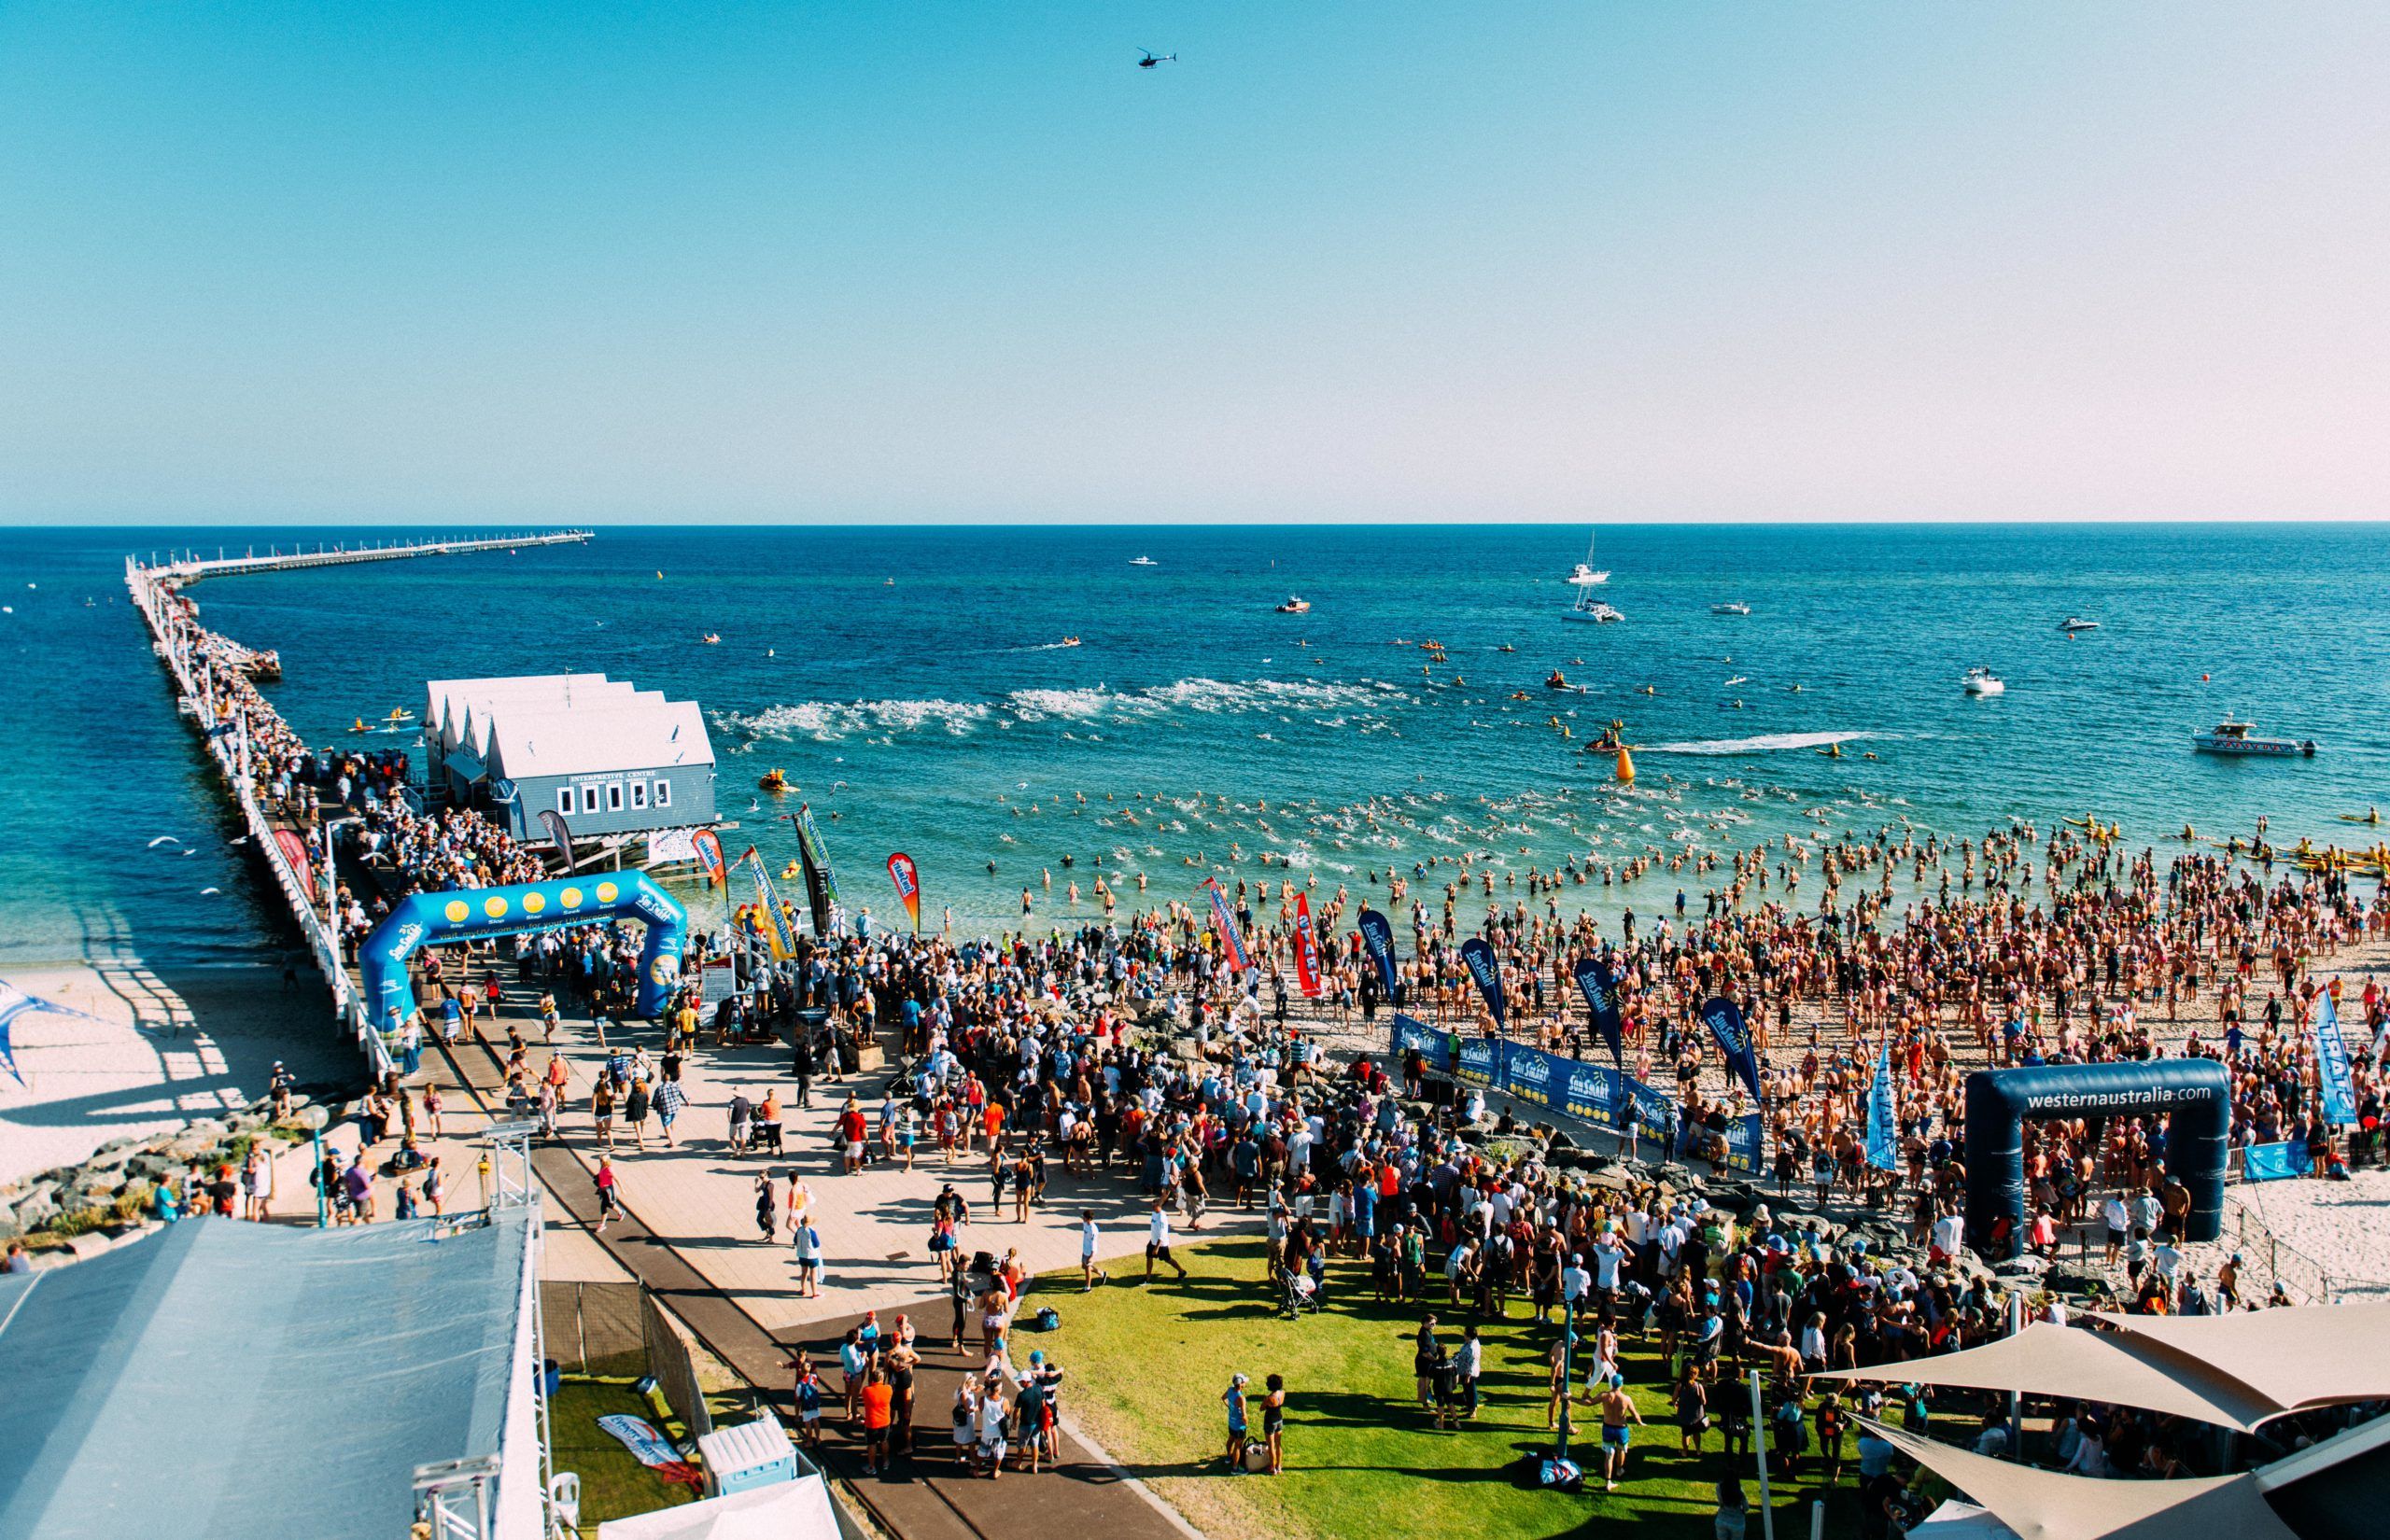 Aerial shot of swimmers and spectators with Busselton Jetty for the Busselton Jetty swim